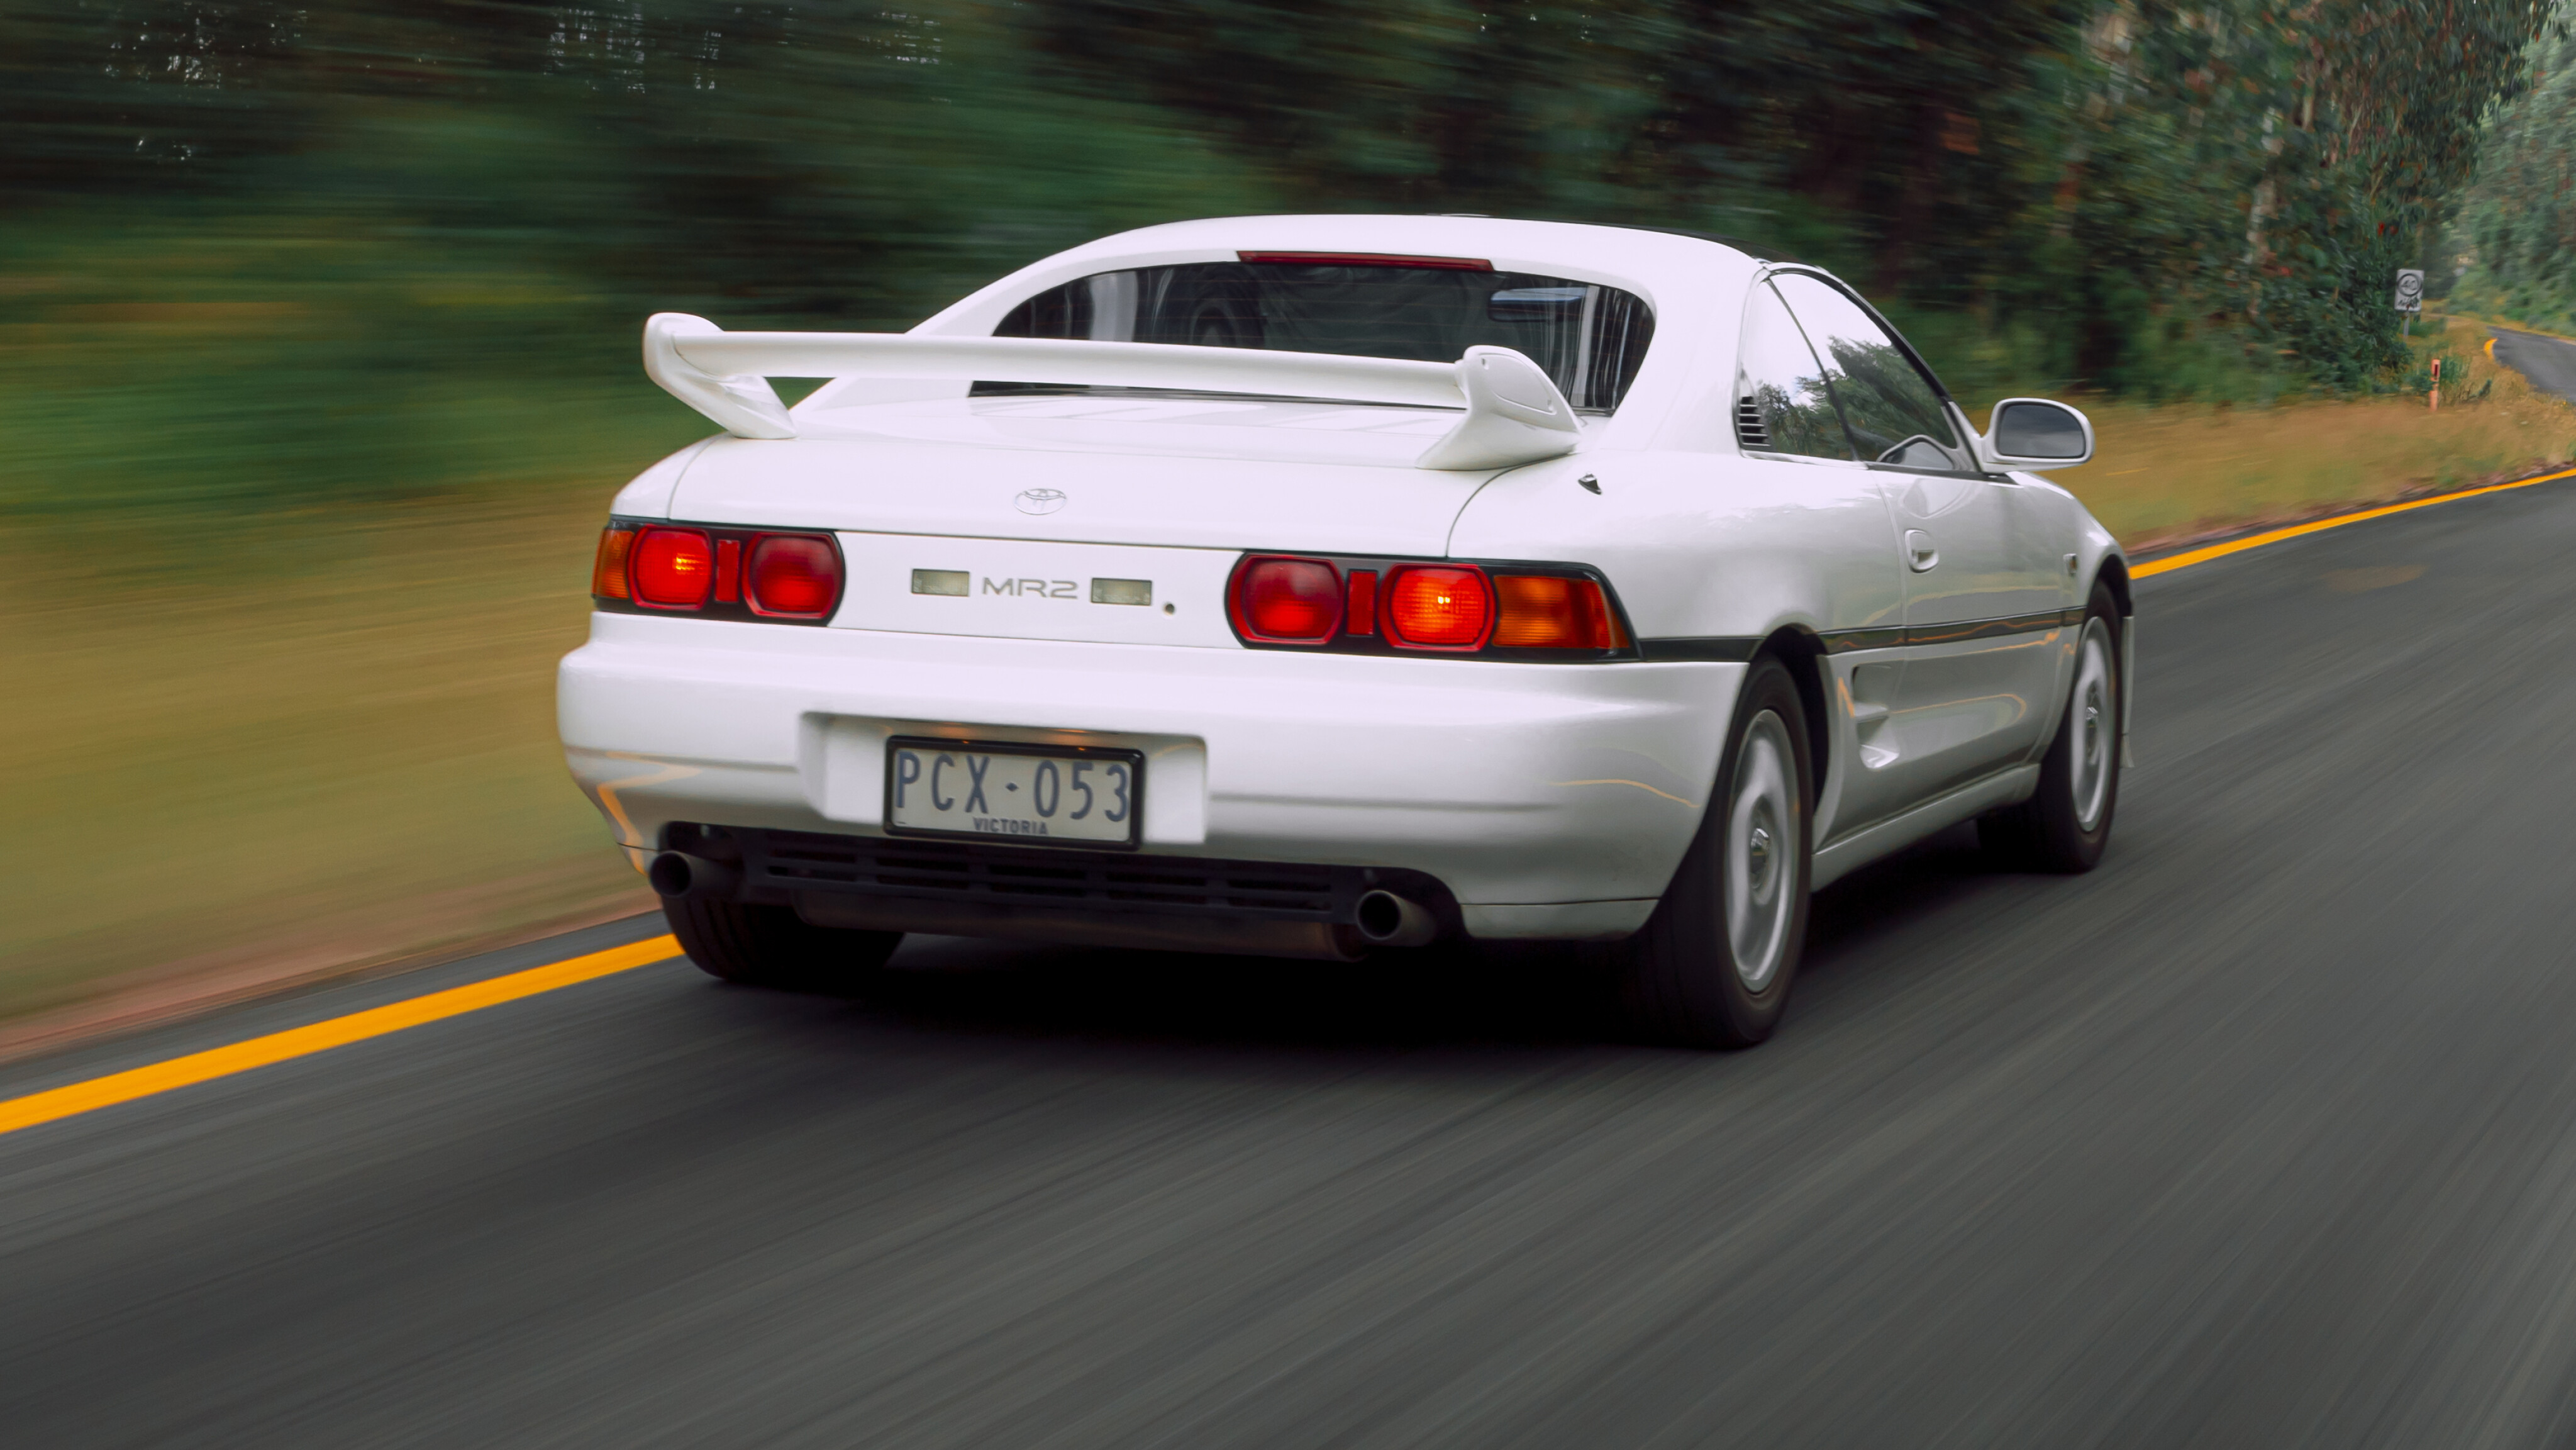 14d21c52/modern classic toyota mr2 sw20 white coupe abrook 2303224 jpg